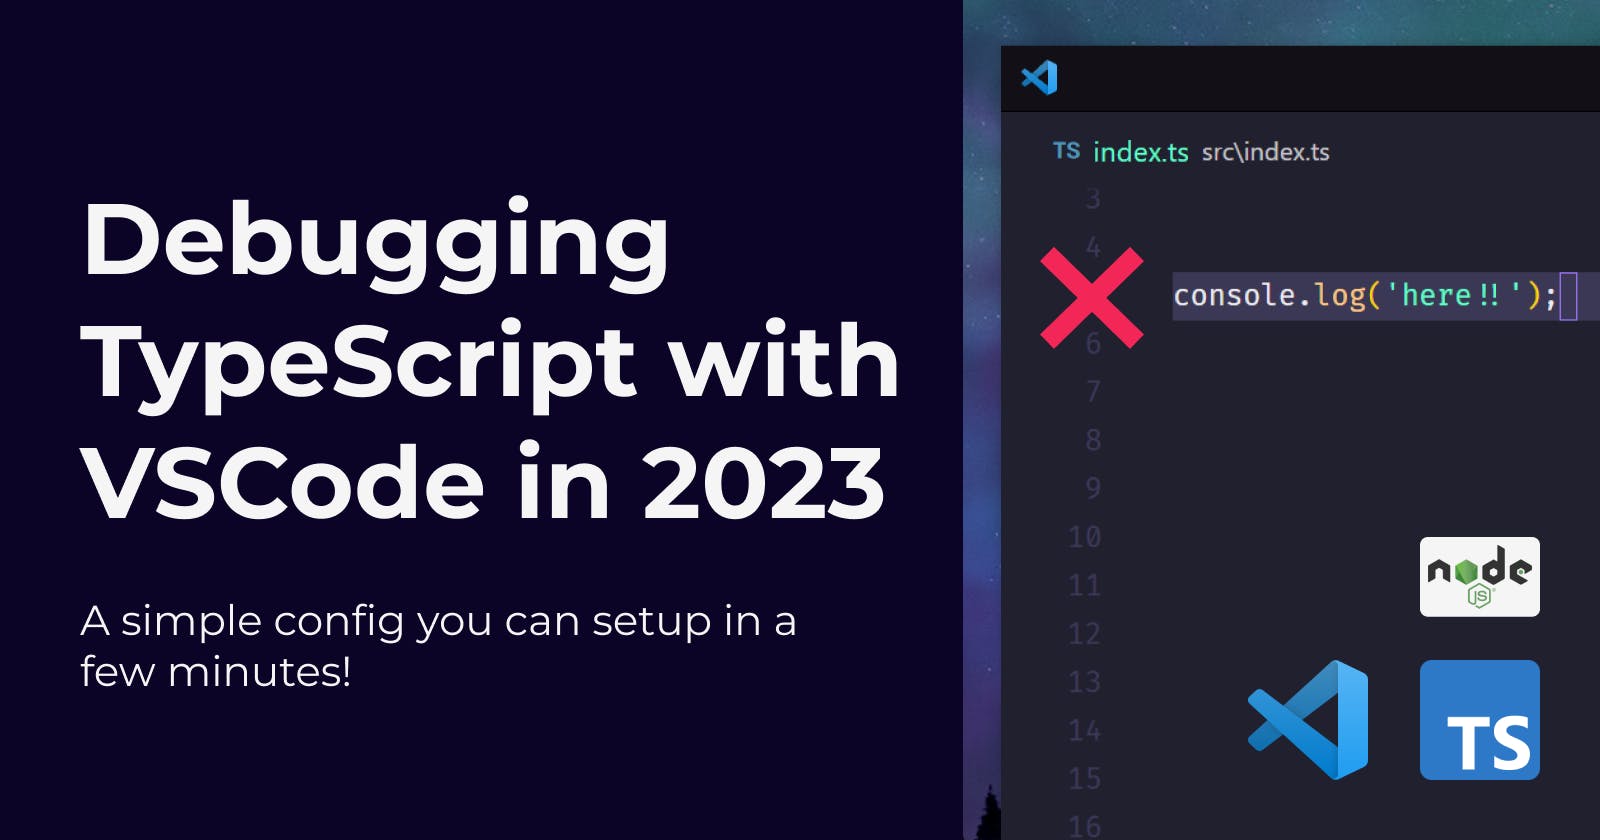 Debugging TypeScript projects with VSCode in 2023